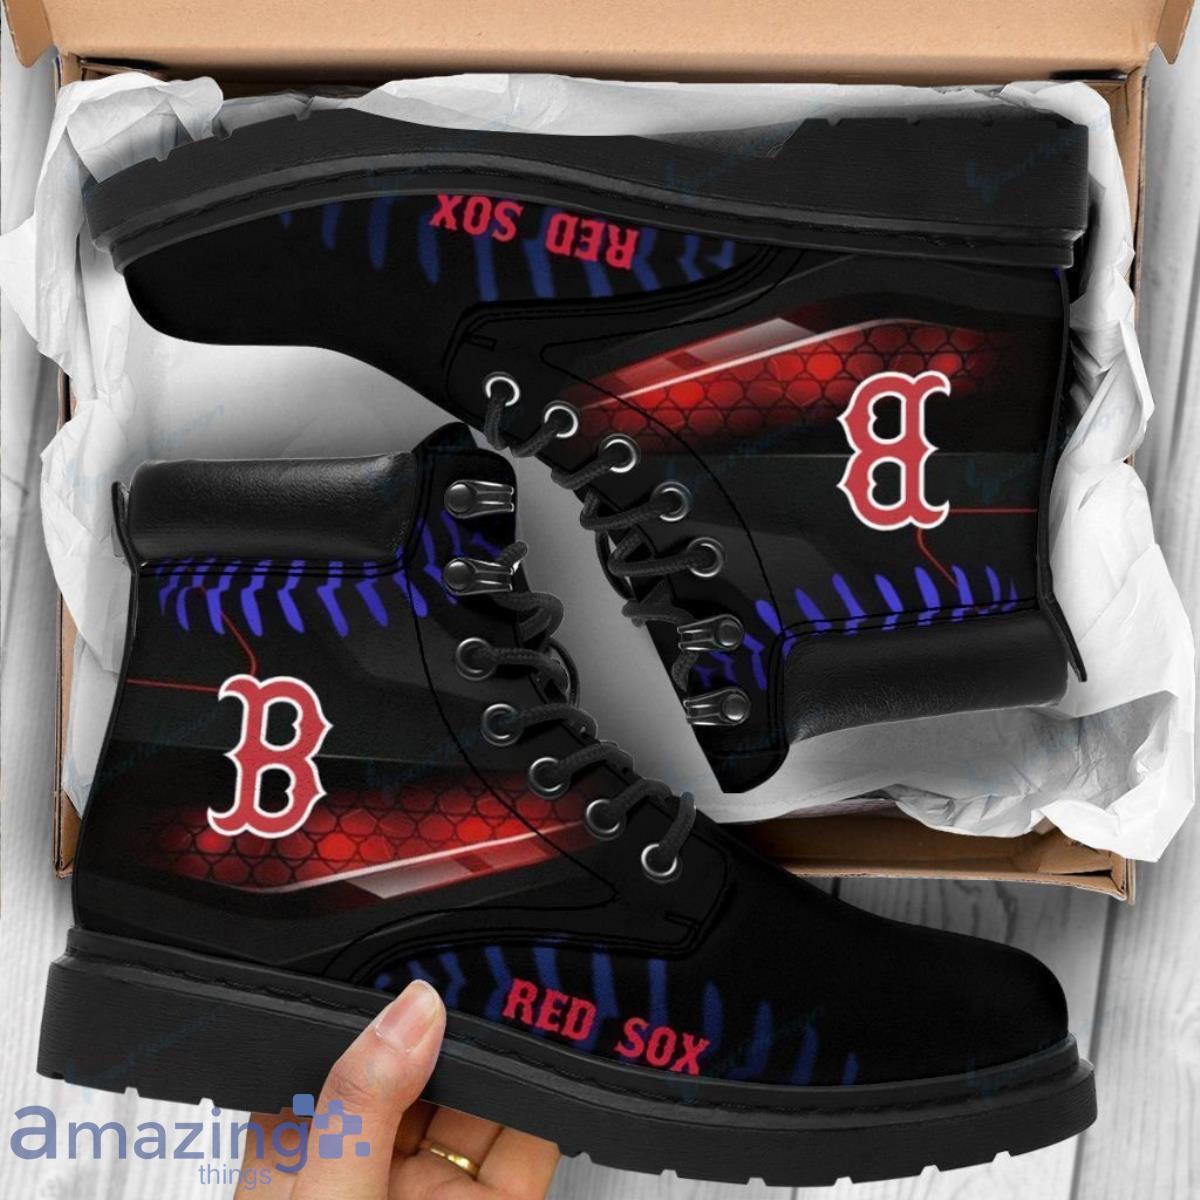 Boston Red Sox Football Team Leather Boots For Men Women Unique Gift For Fans Product Photo 1